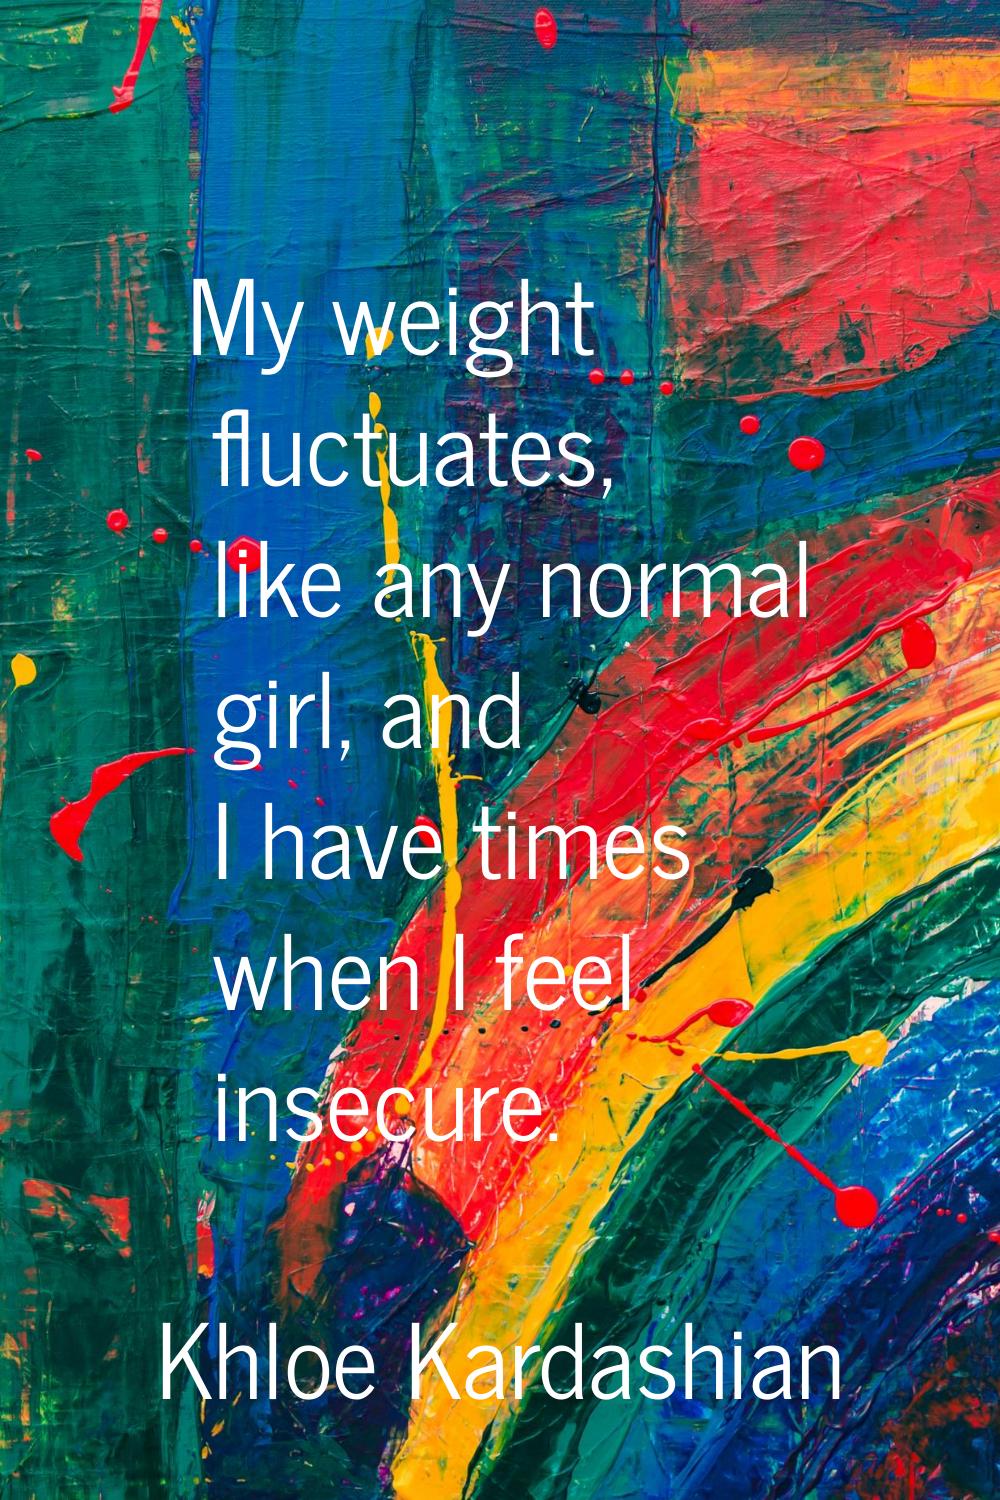 My weight fluctuates, like any normal girl, and I have times when I feel insecure.